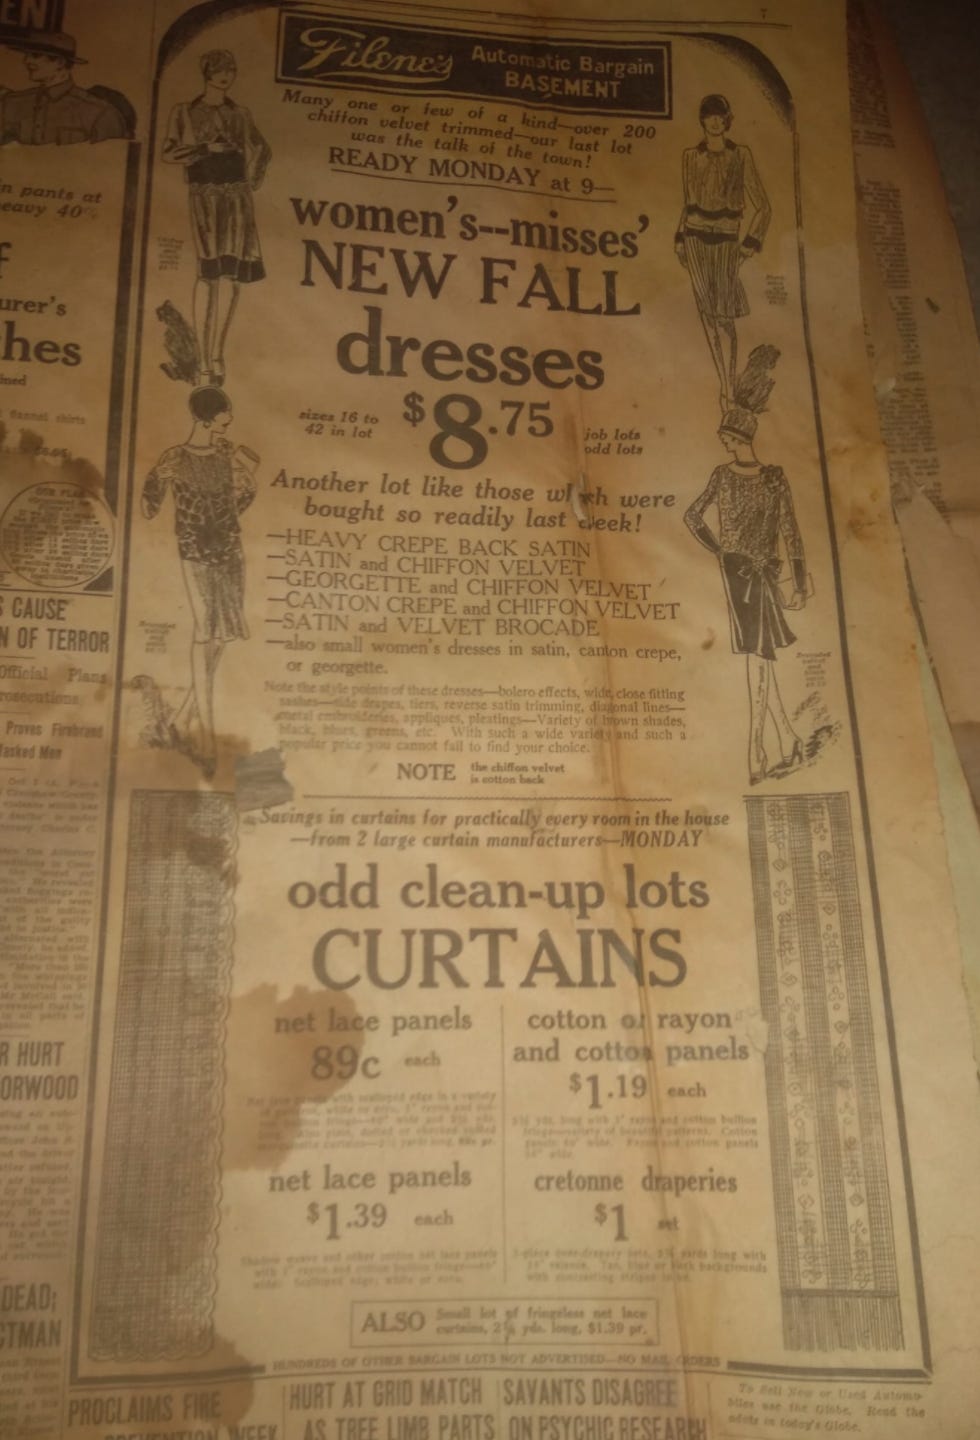 Image of old newspaper add for Filene's basement, featuring new dresses for women.